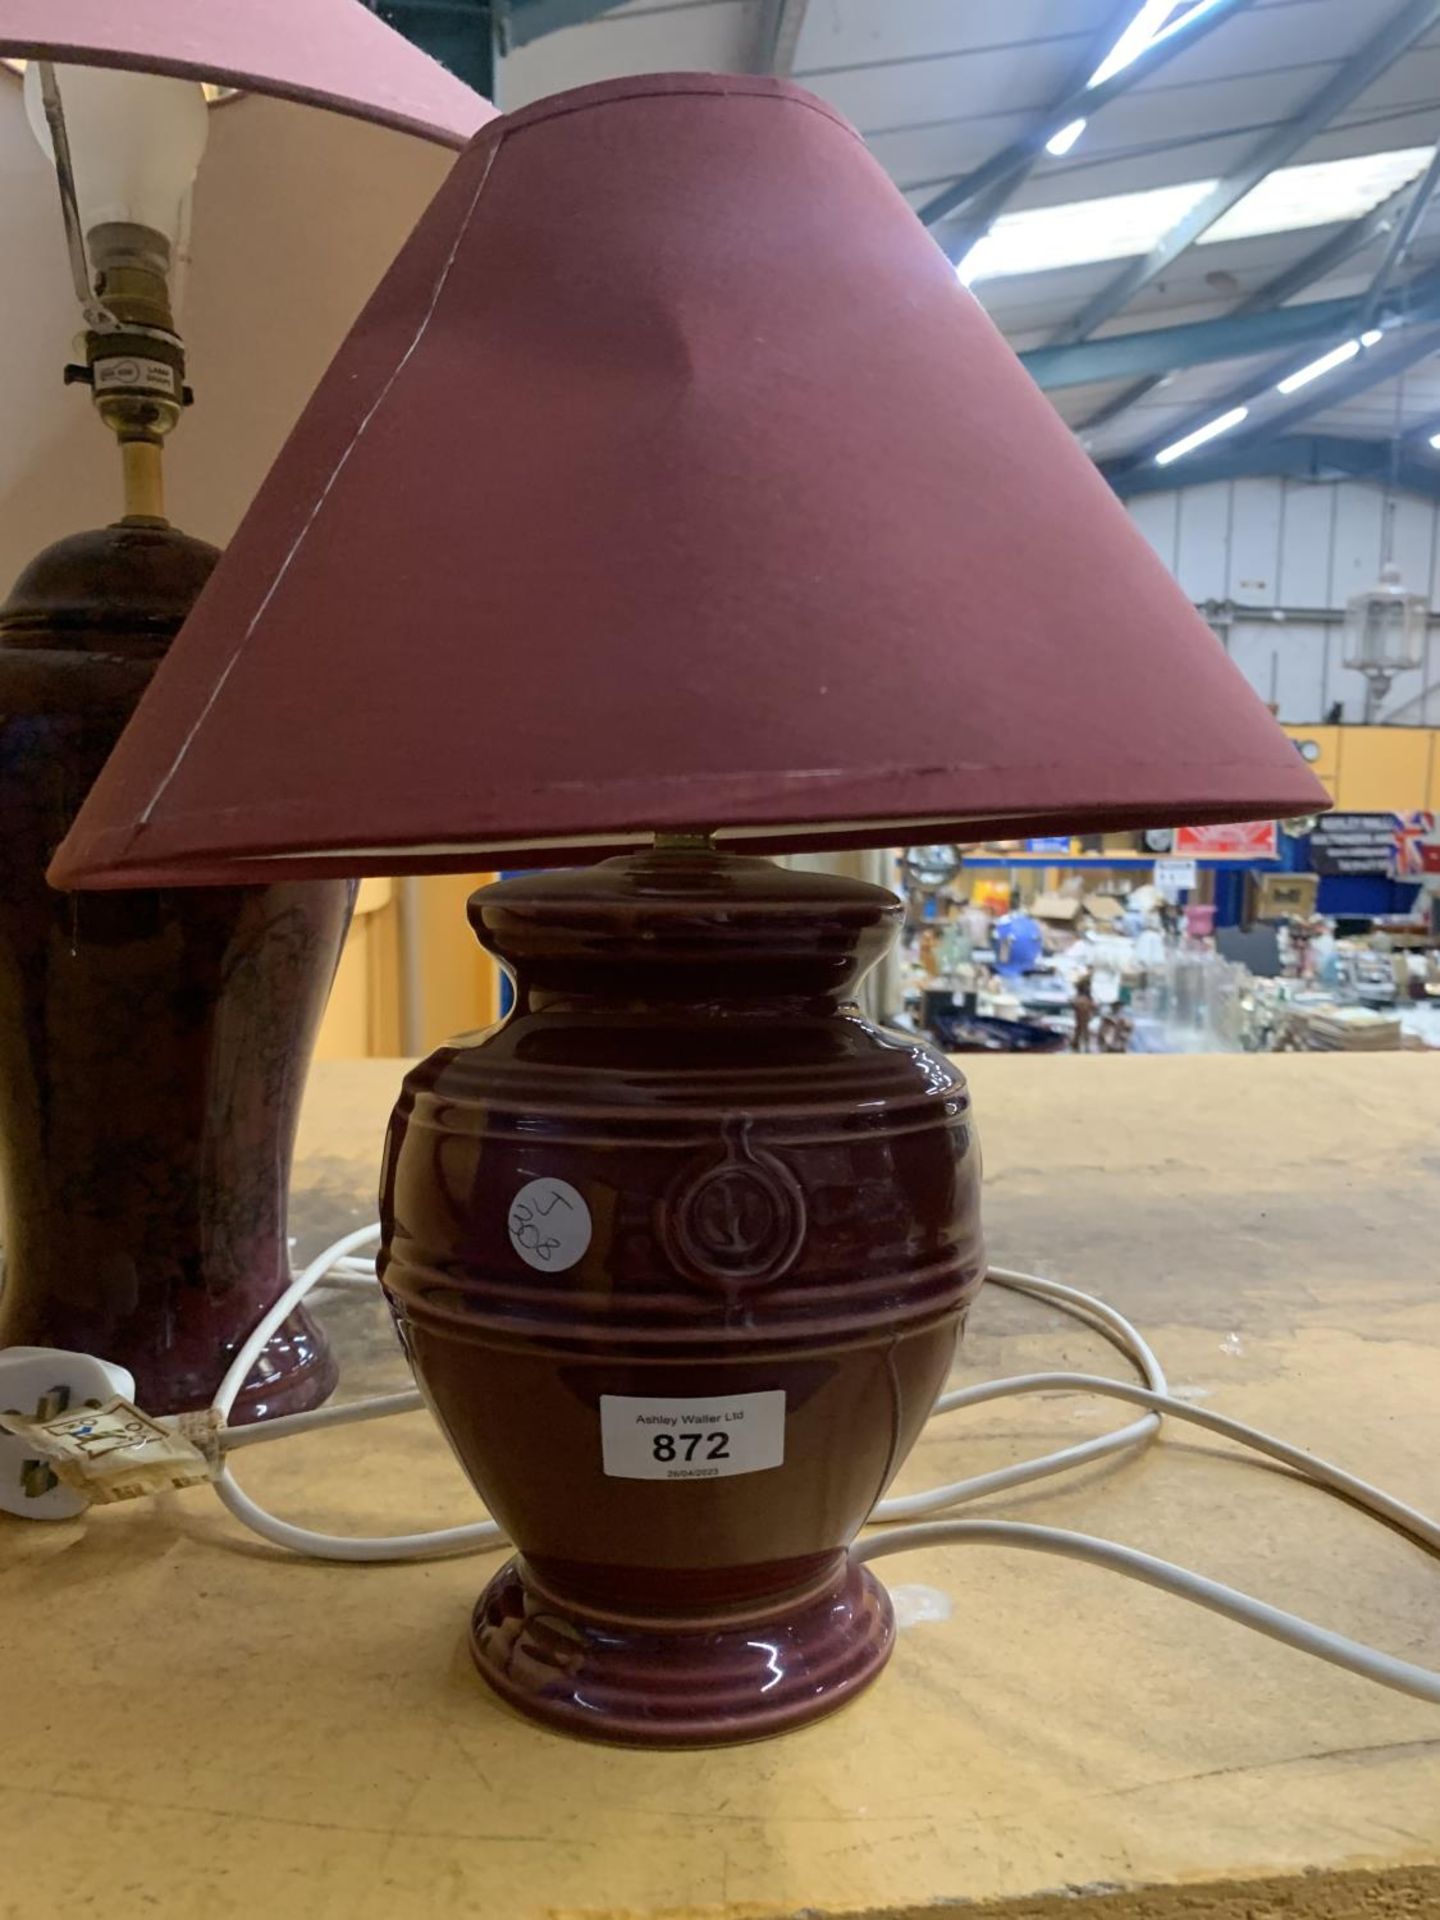 TWO BURGUNDY CERAMIC TABLE LAMPS WITH SHADES - Image 2 of 3